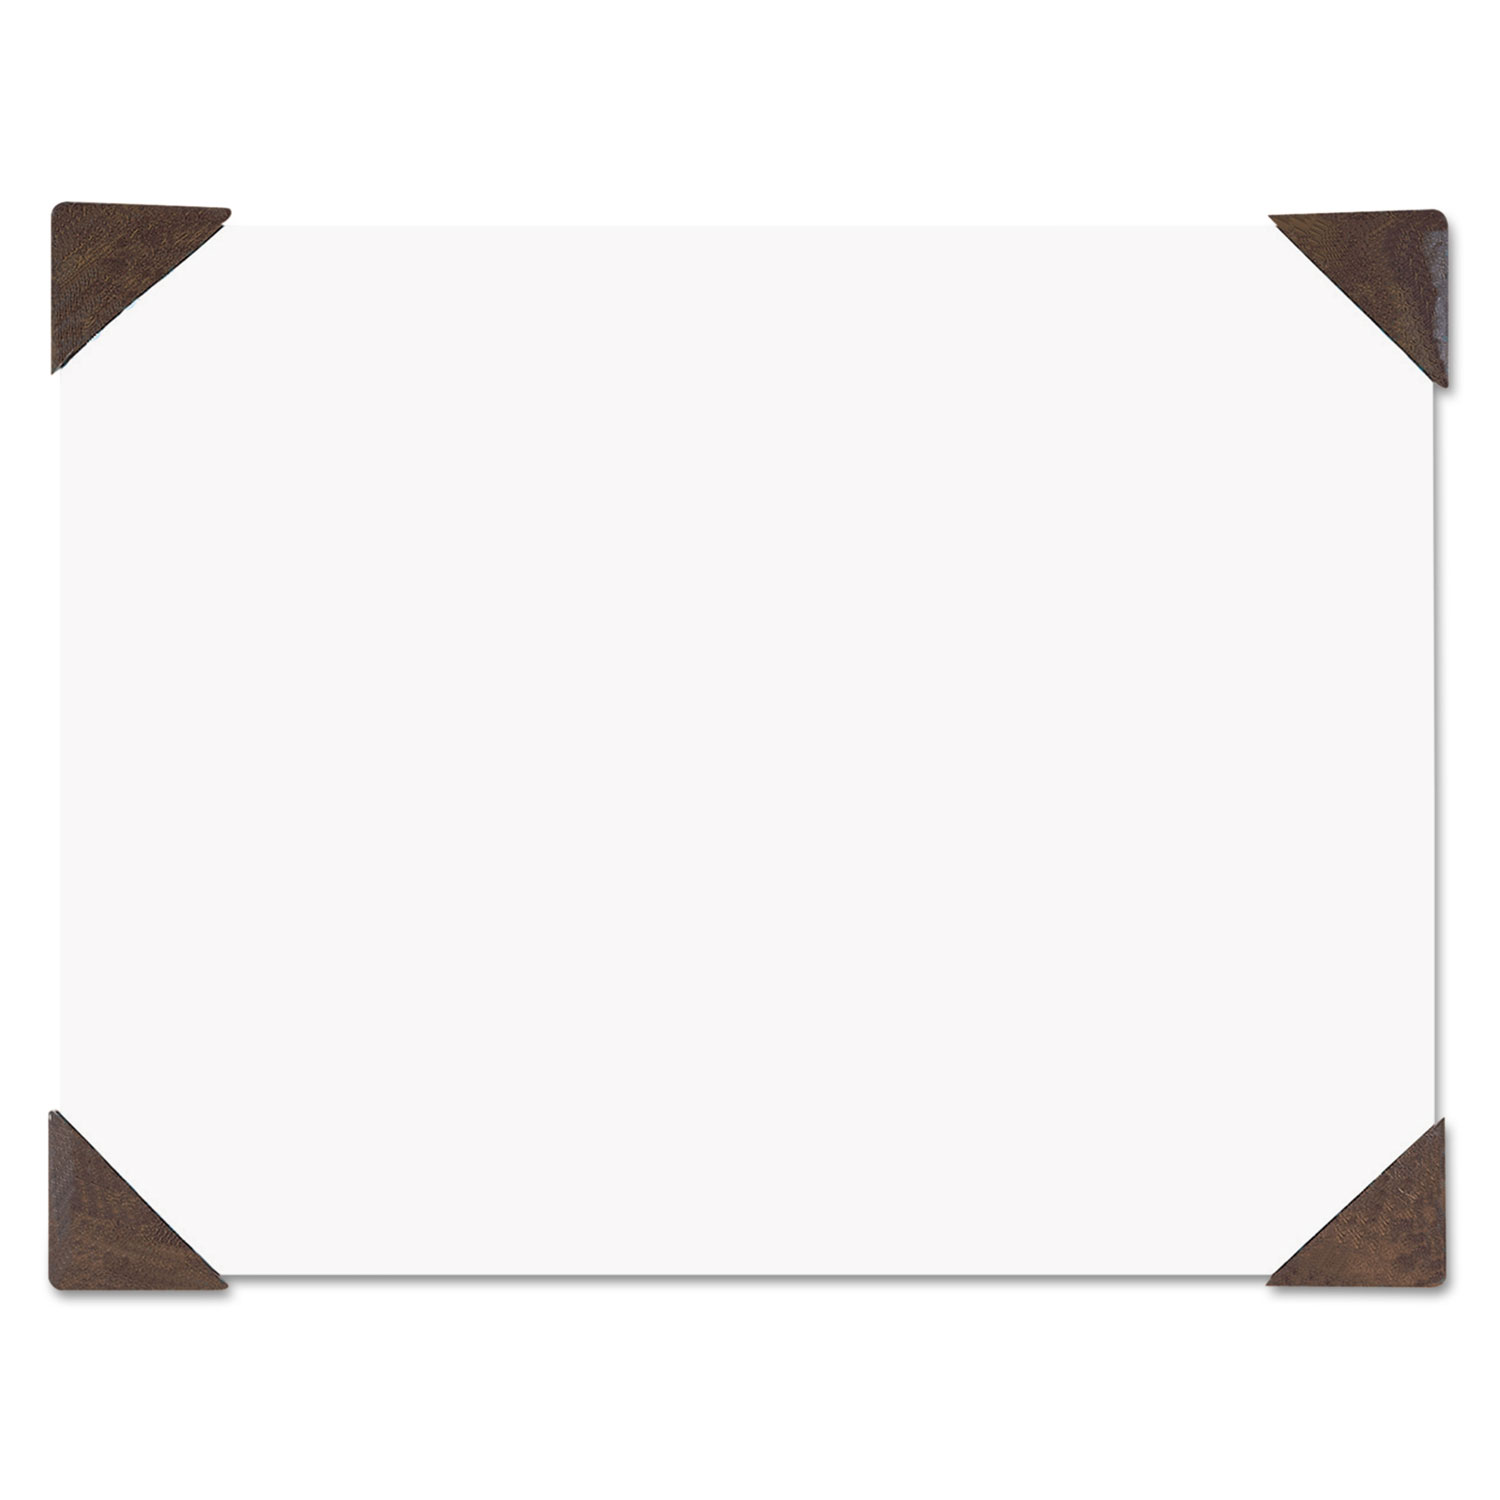  House of Doolittle 400-03 100% Recycled Doodle Desk Pad, Unruled, 50 Sheets, Refillable, 22 x 17, Brown (HOD40003) 